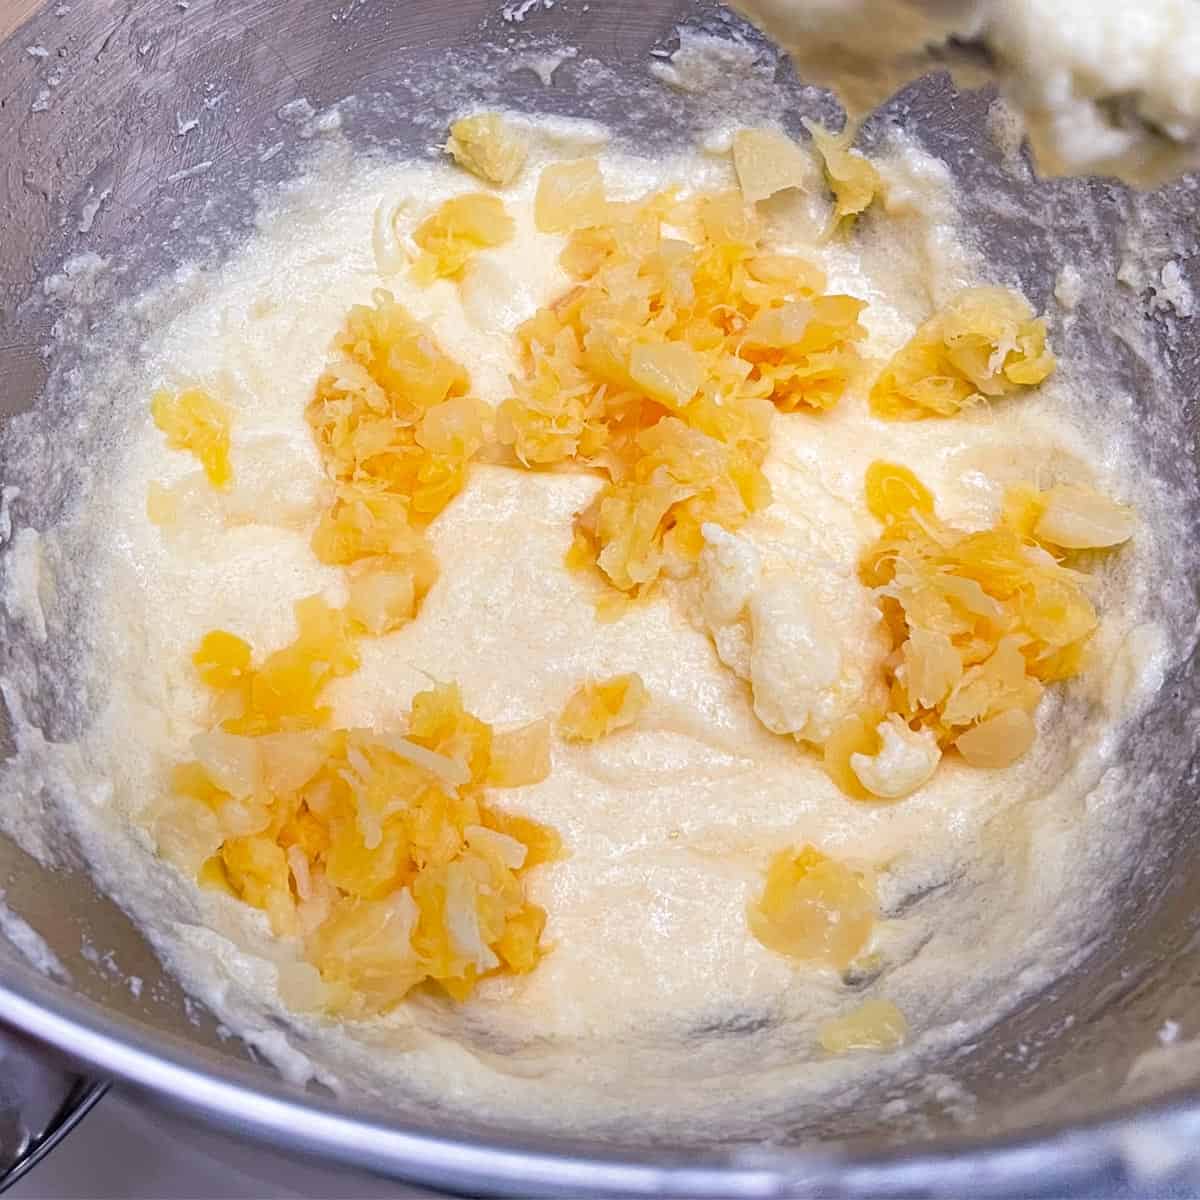 Adding the crushed pineapple that has been drained to the cookie dough.